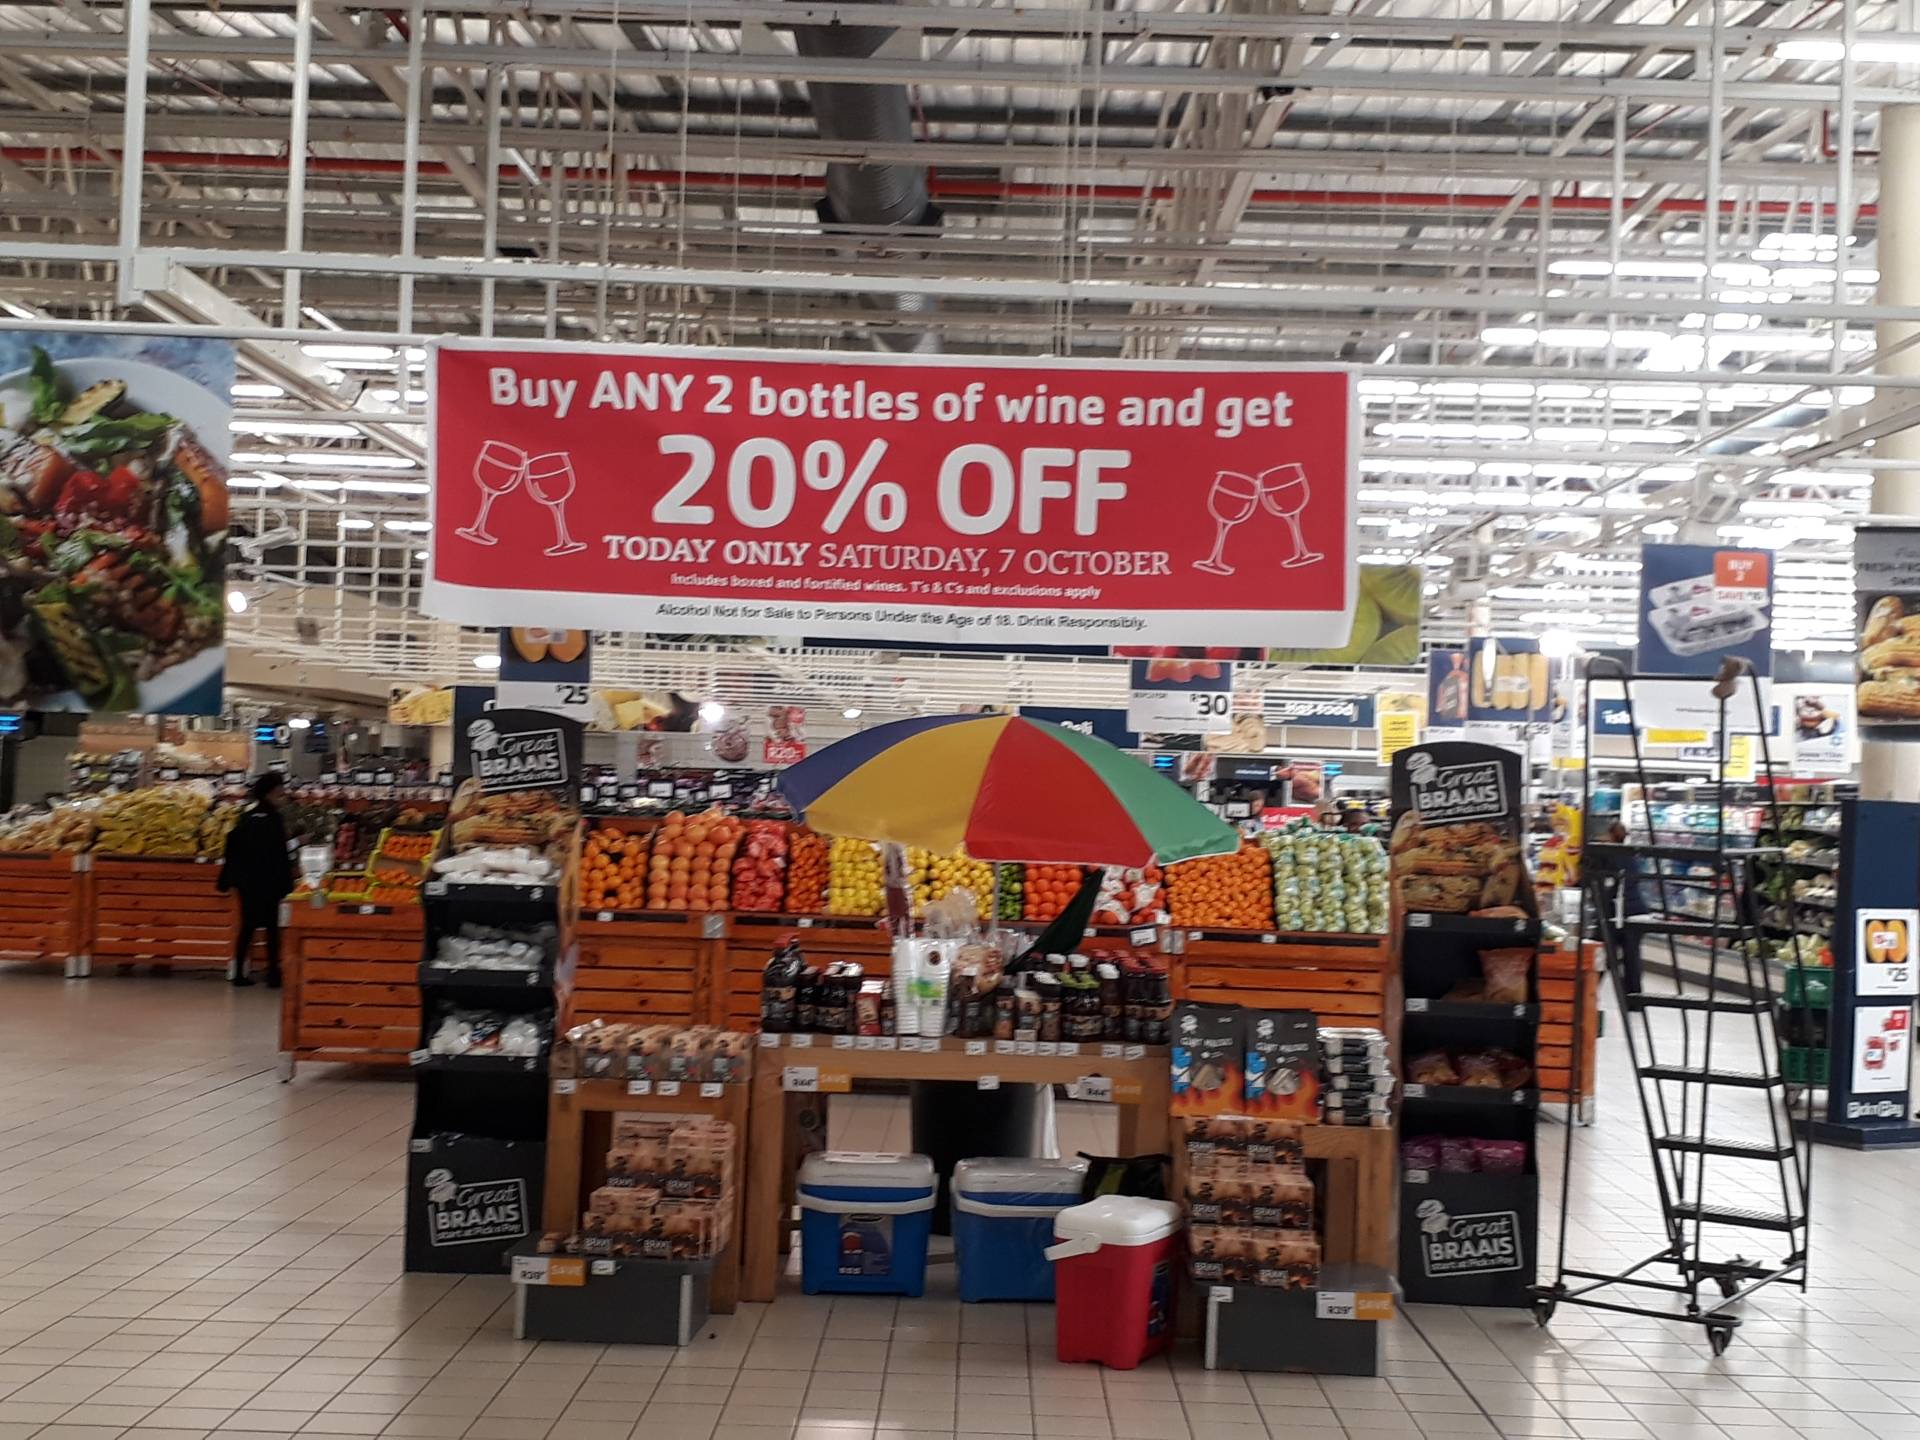 Pick n Pay Tableview